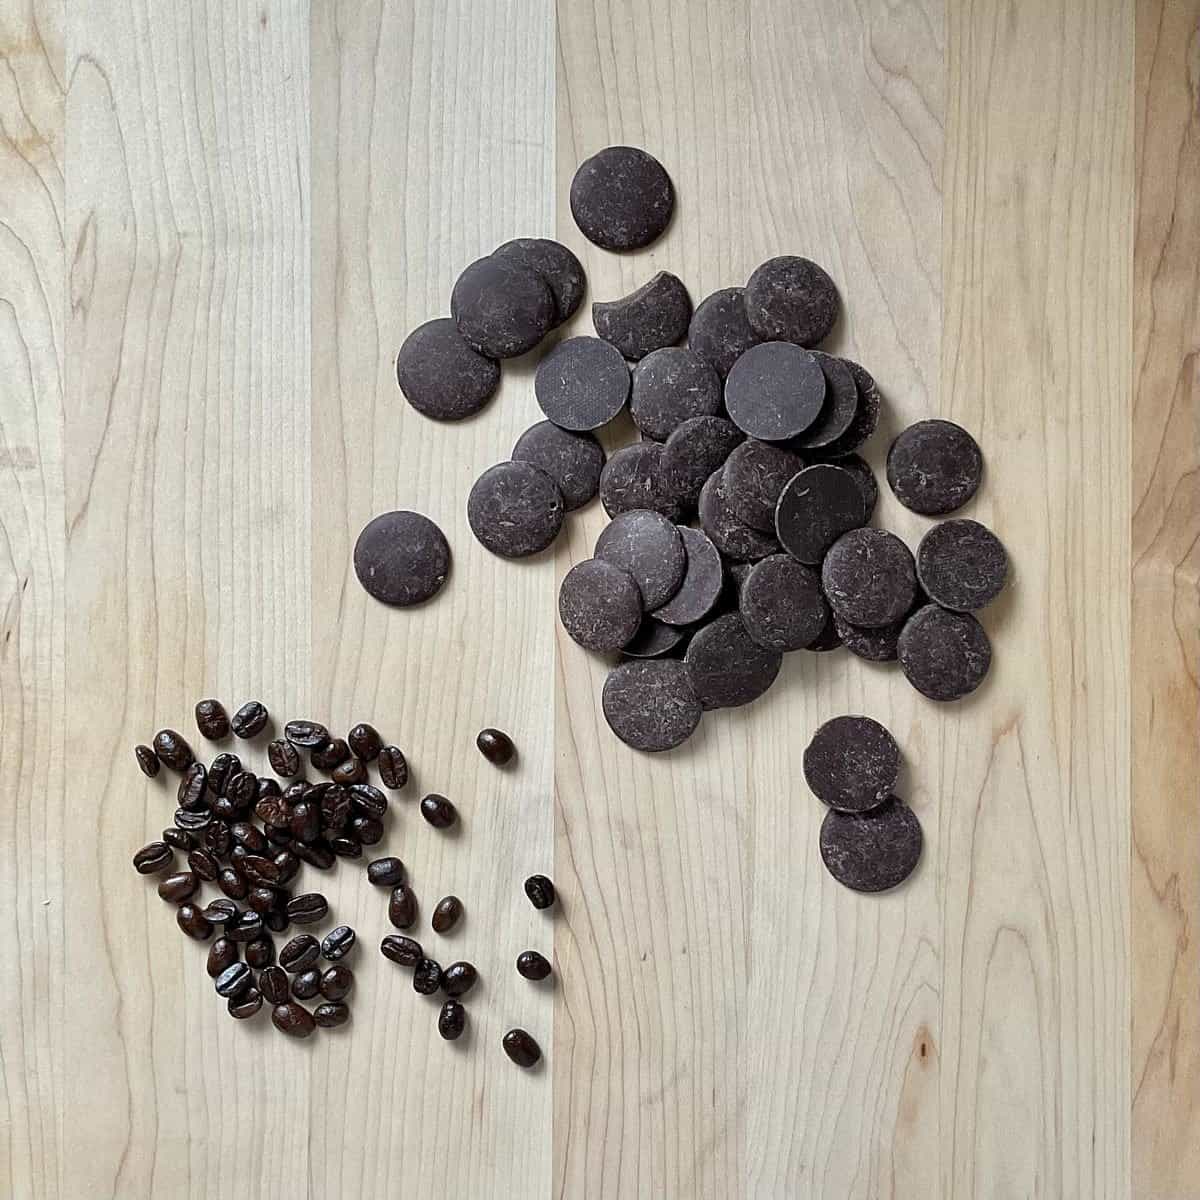 Whole espresso beans and dark chocolate discs on a wooden board.